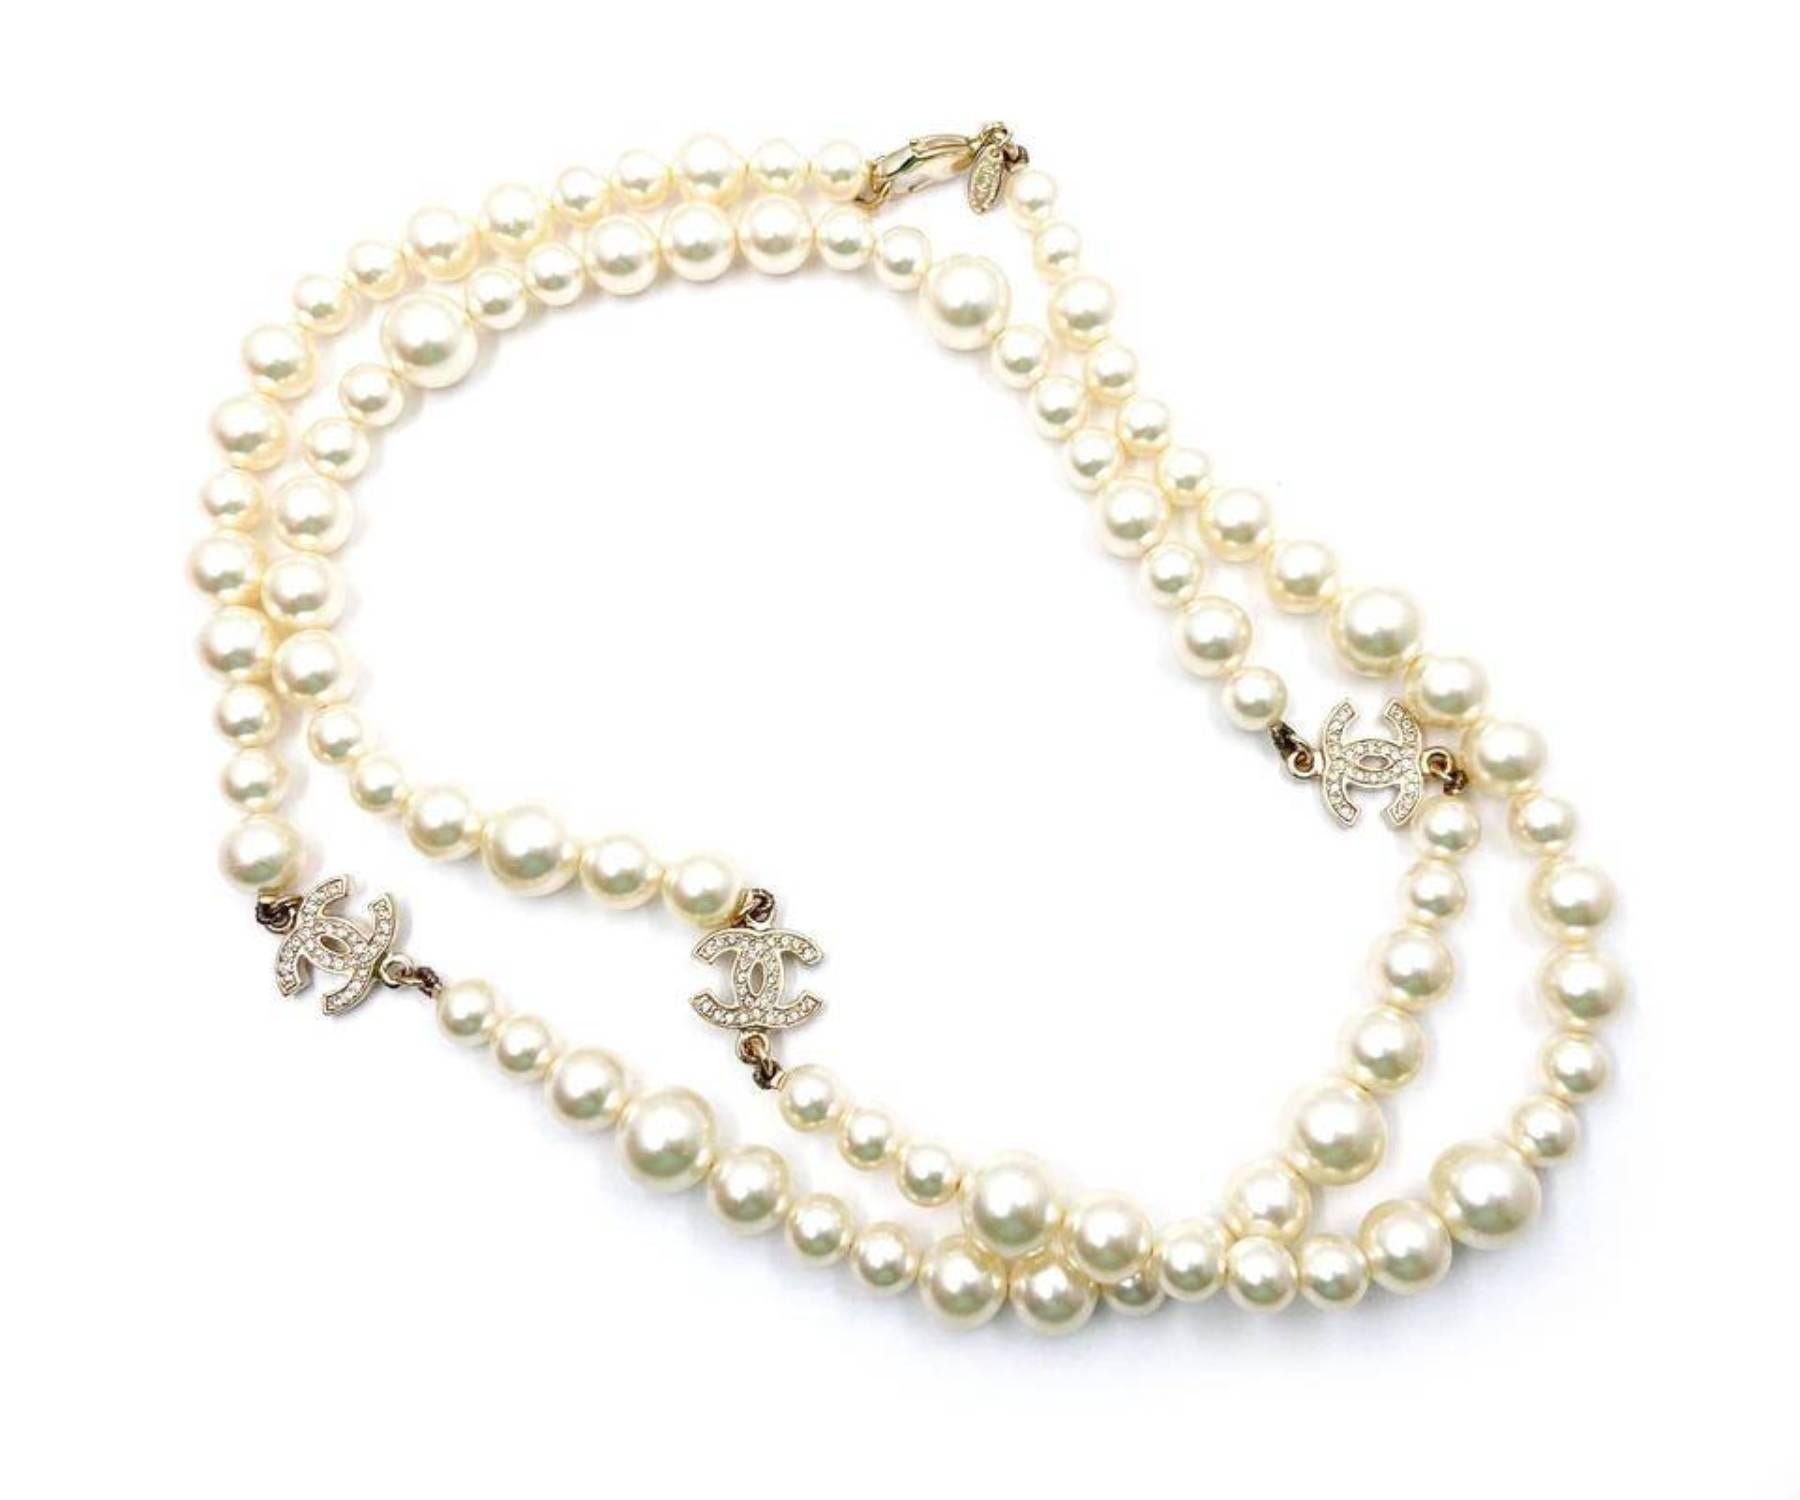 Chanel Classic 3 Gold CC Crystal Long Pearl Necklace

*Marked 10
*Made in France
*Comes with original box

-It is approximately 36